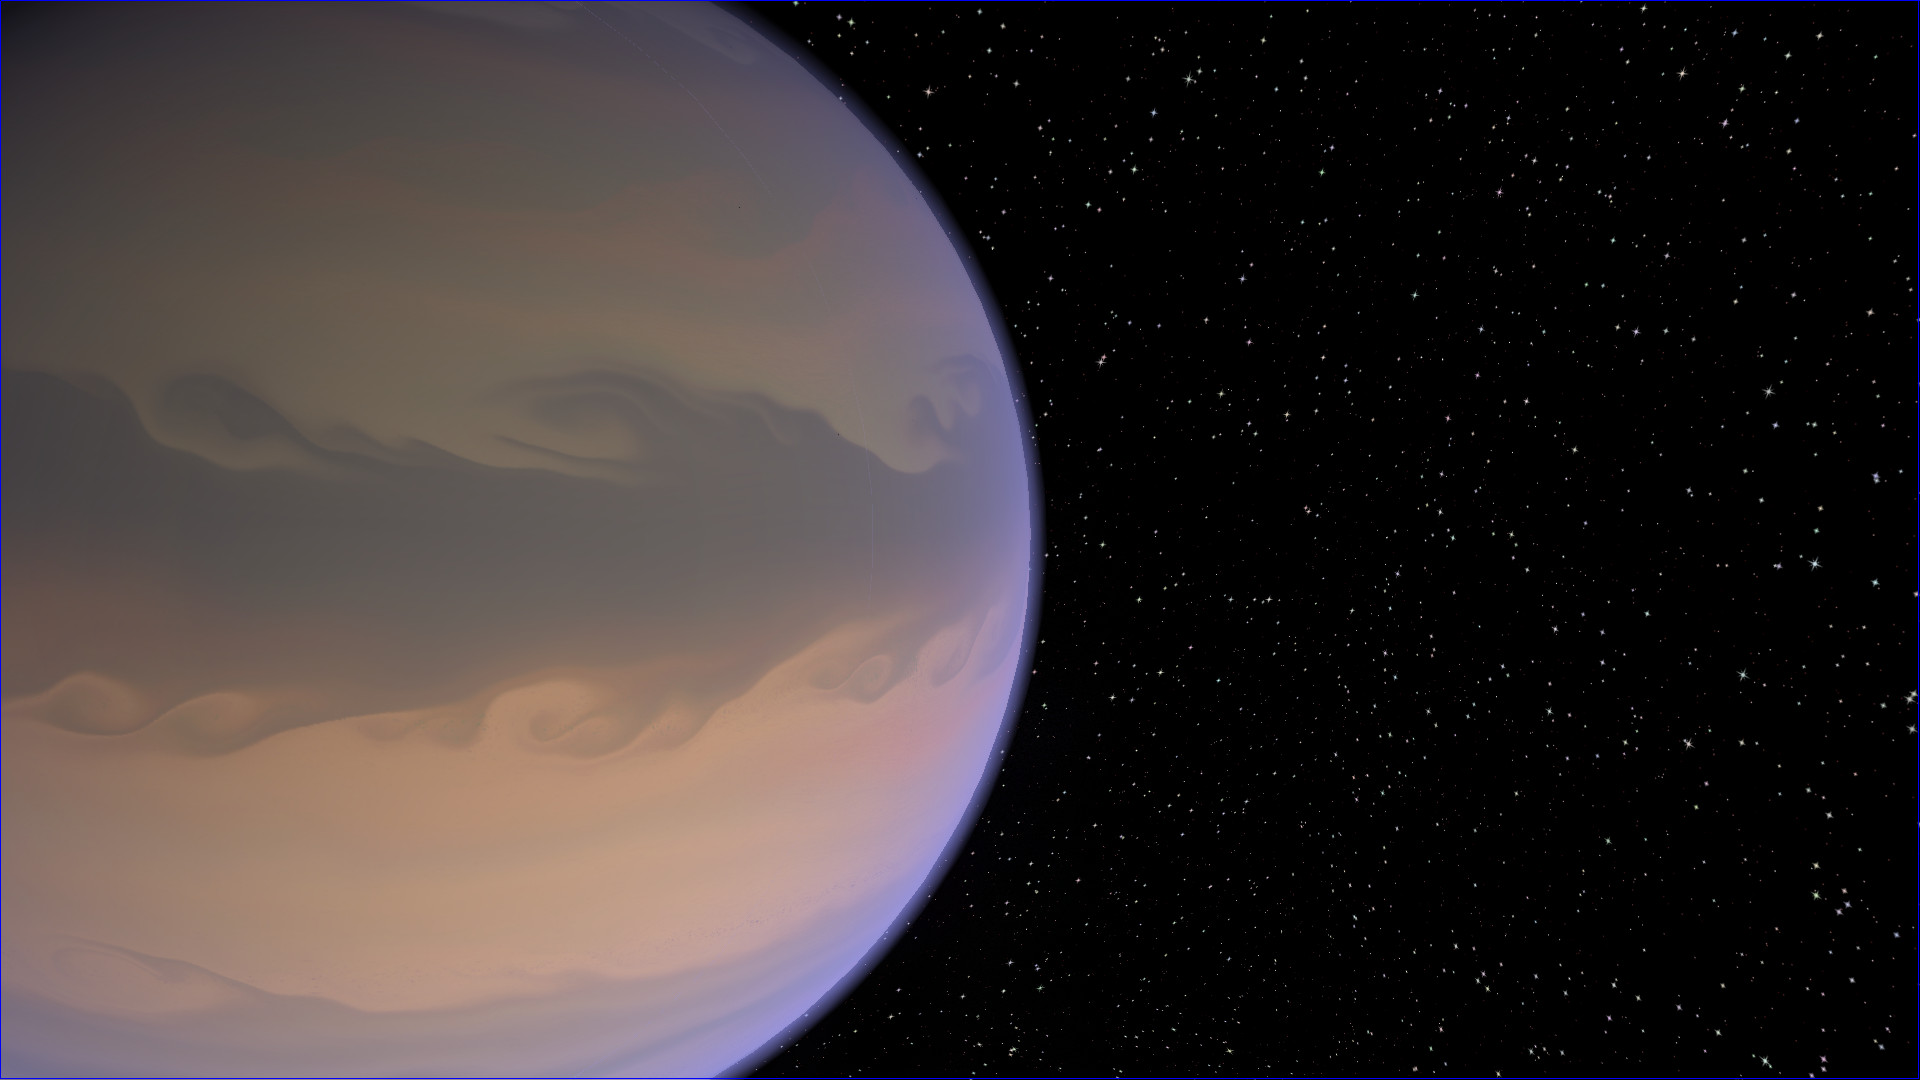 Image of a gas giant